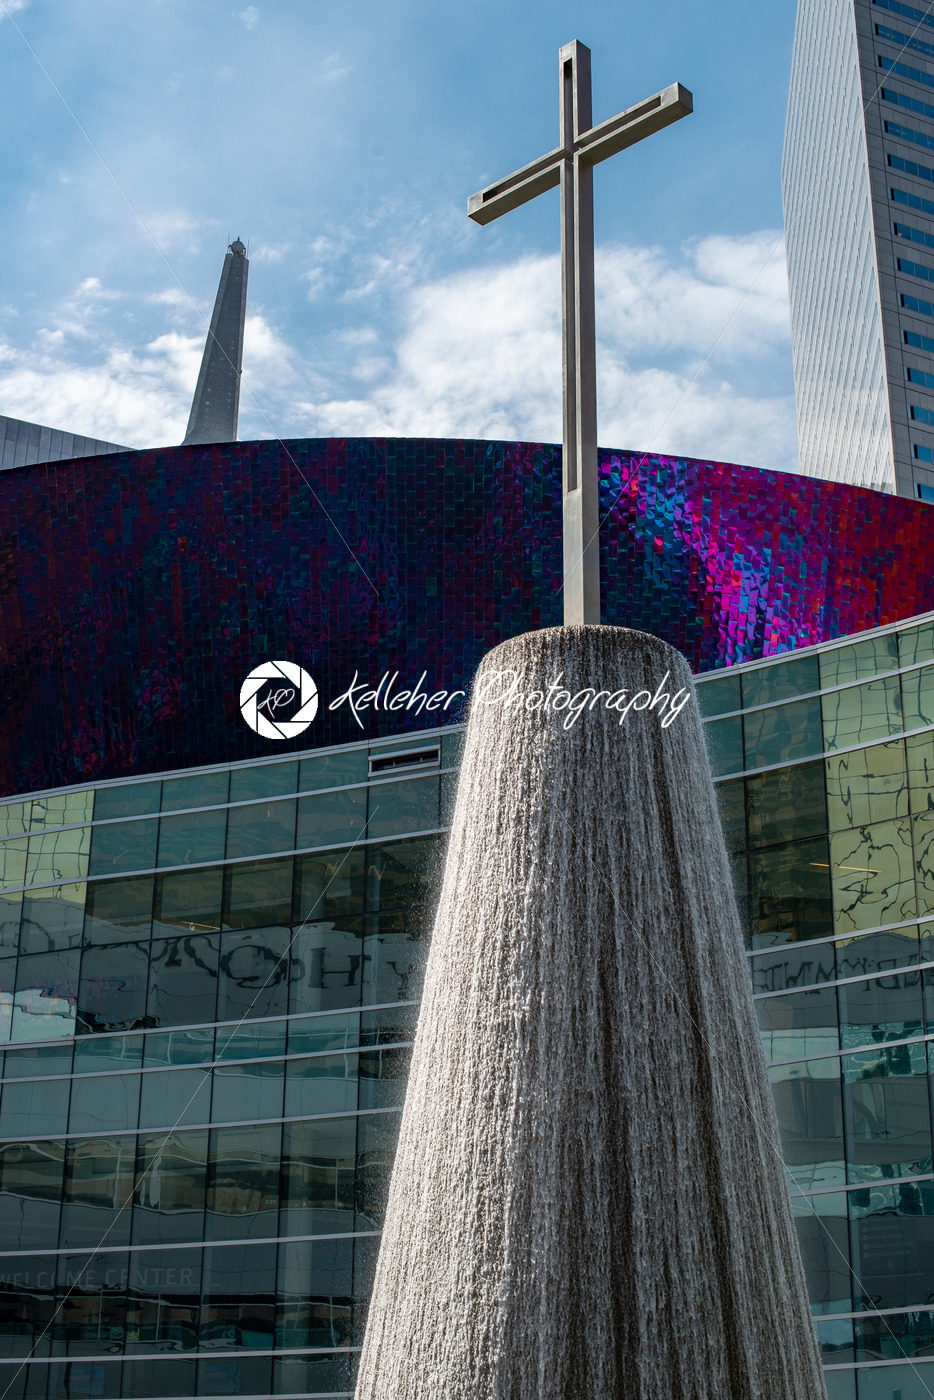 Dallas, Texas – May 7, 2018: Fountain at the First Baptist Church building in Dallas downtown - Kelleher Photography Store